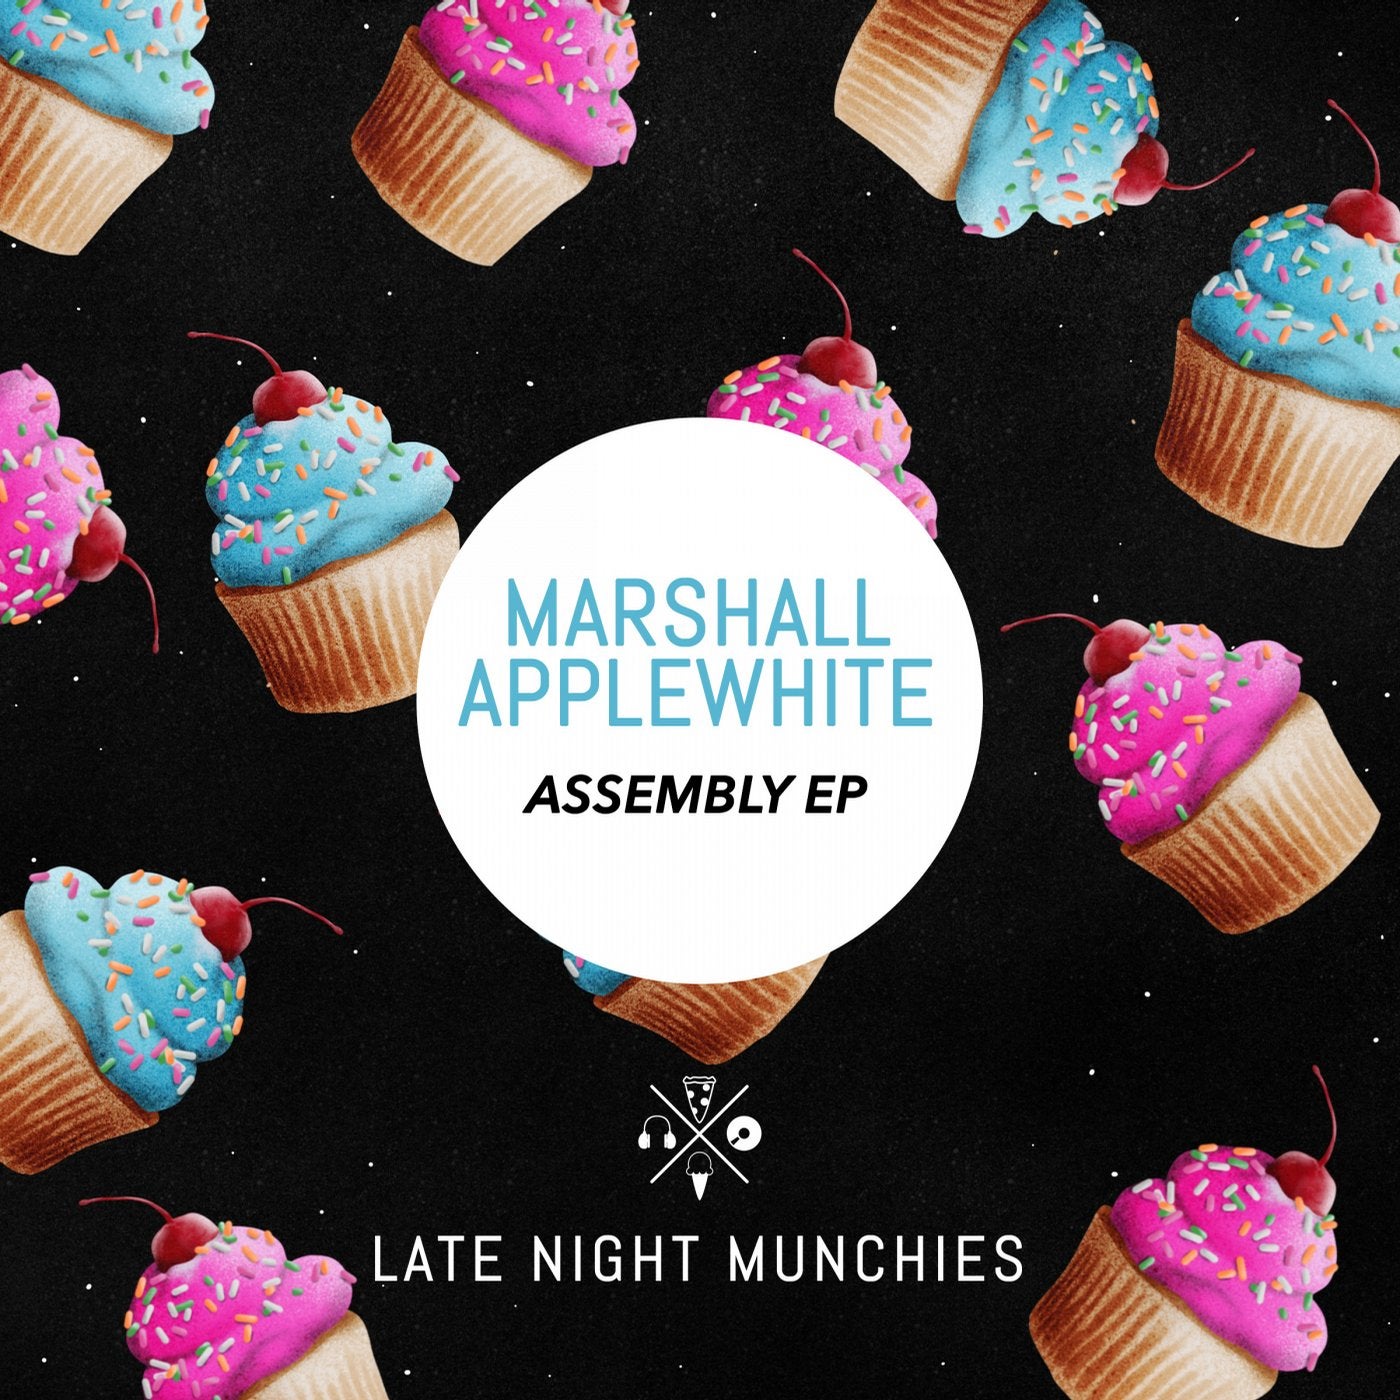 Assembly EP